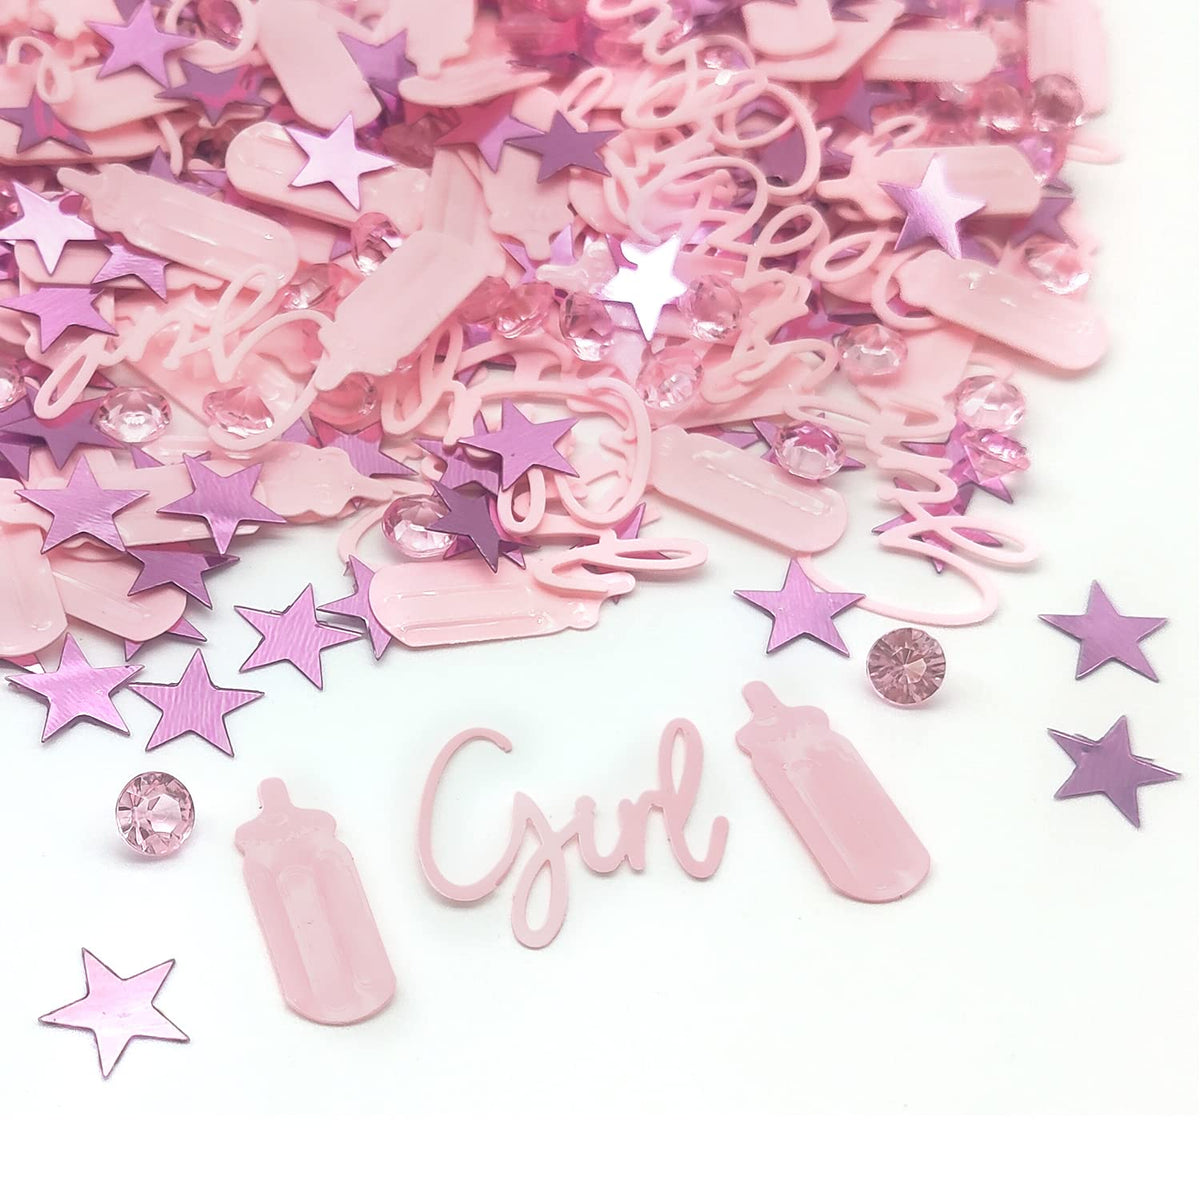 Baby Shower Confetti - Its A Girl, Glitter Confetti Sprinkles for Birthday Party Table Scatters Decoration, Table Scatter Confetti Baby Gender Reveal Jungle Birthday Decorations A3BSZX